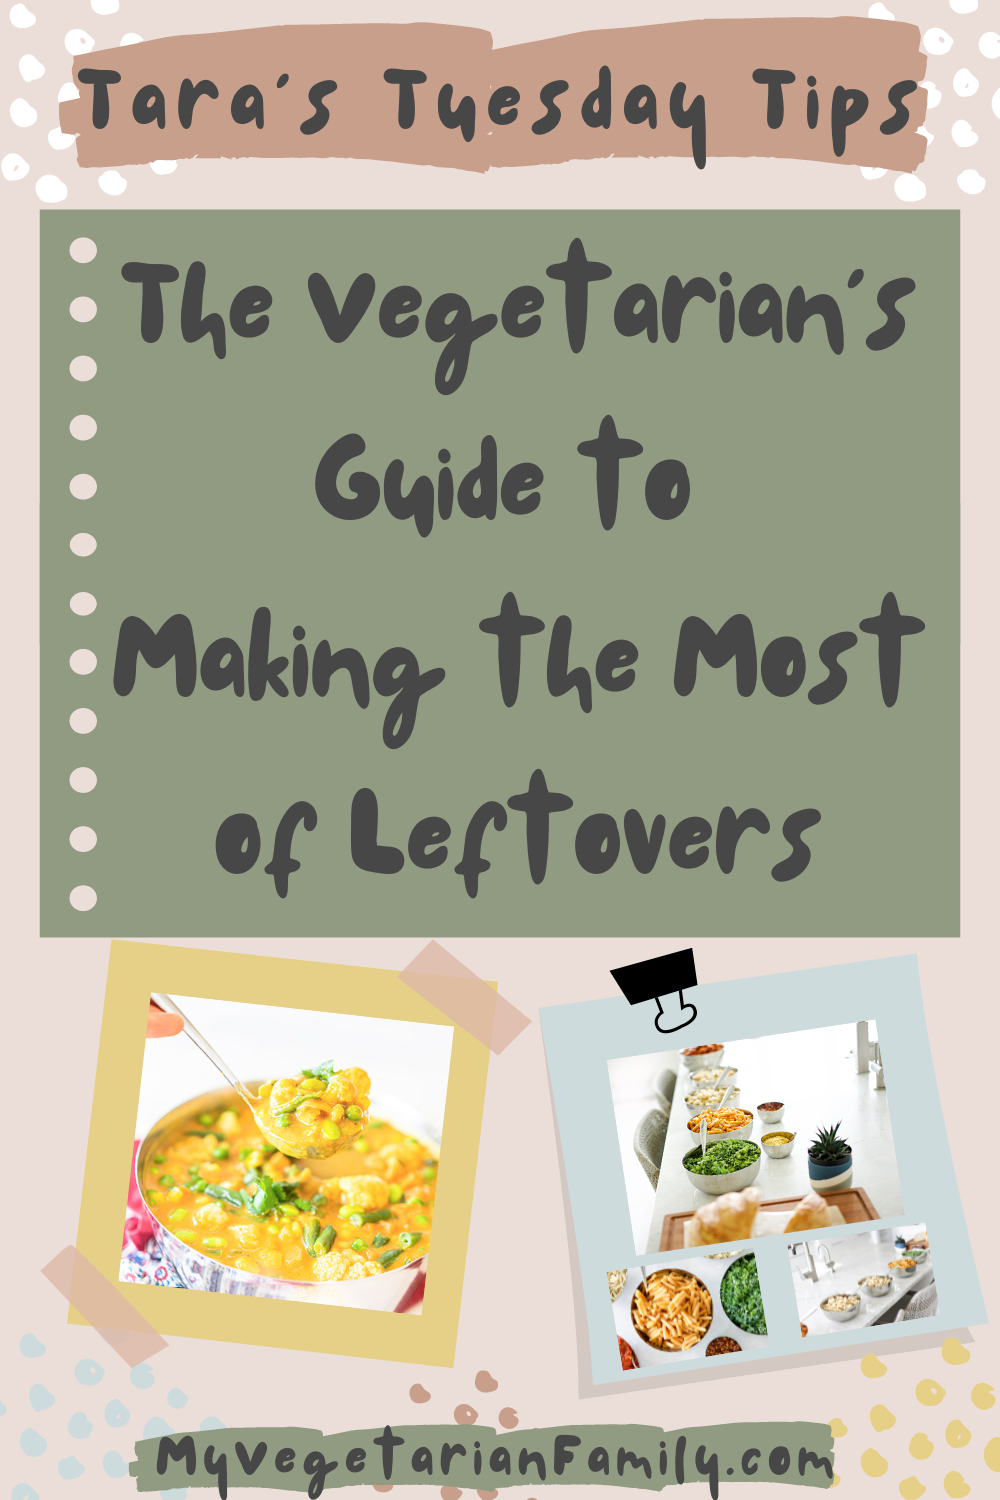 The Vegetarian's Guide to Making the Most of Leftovers | My Vegetarian Family | Tara's Tuesday Tips #nutritiontips #tarastuesdaytips